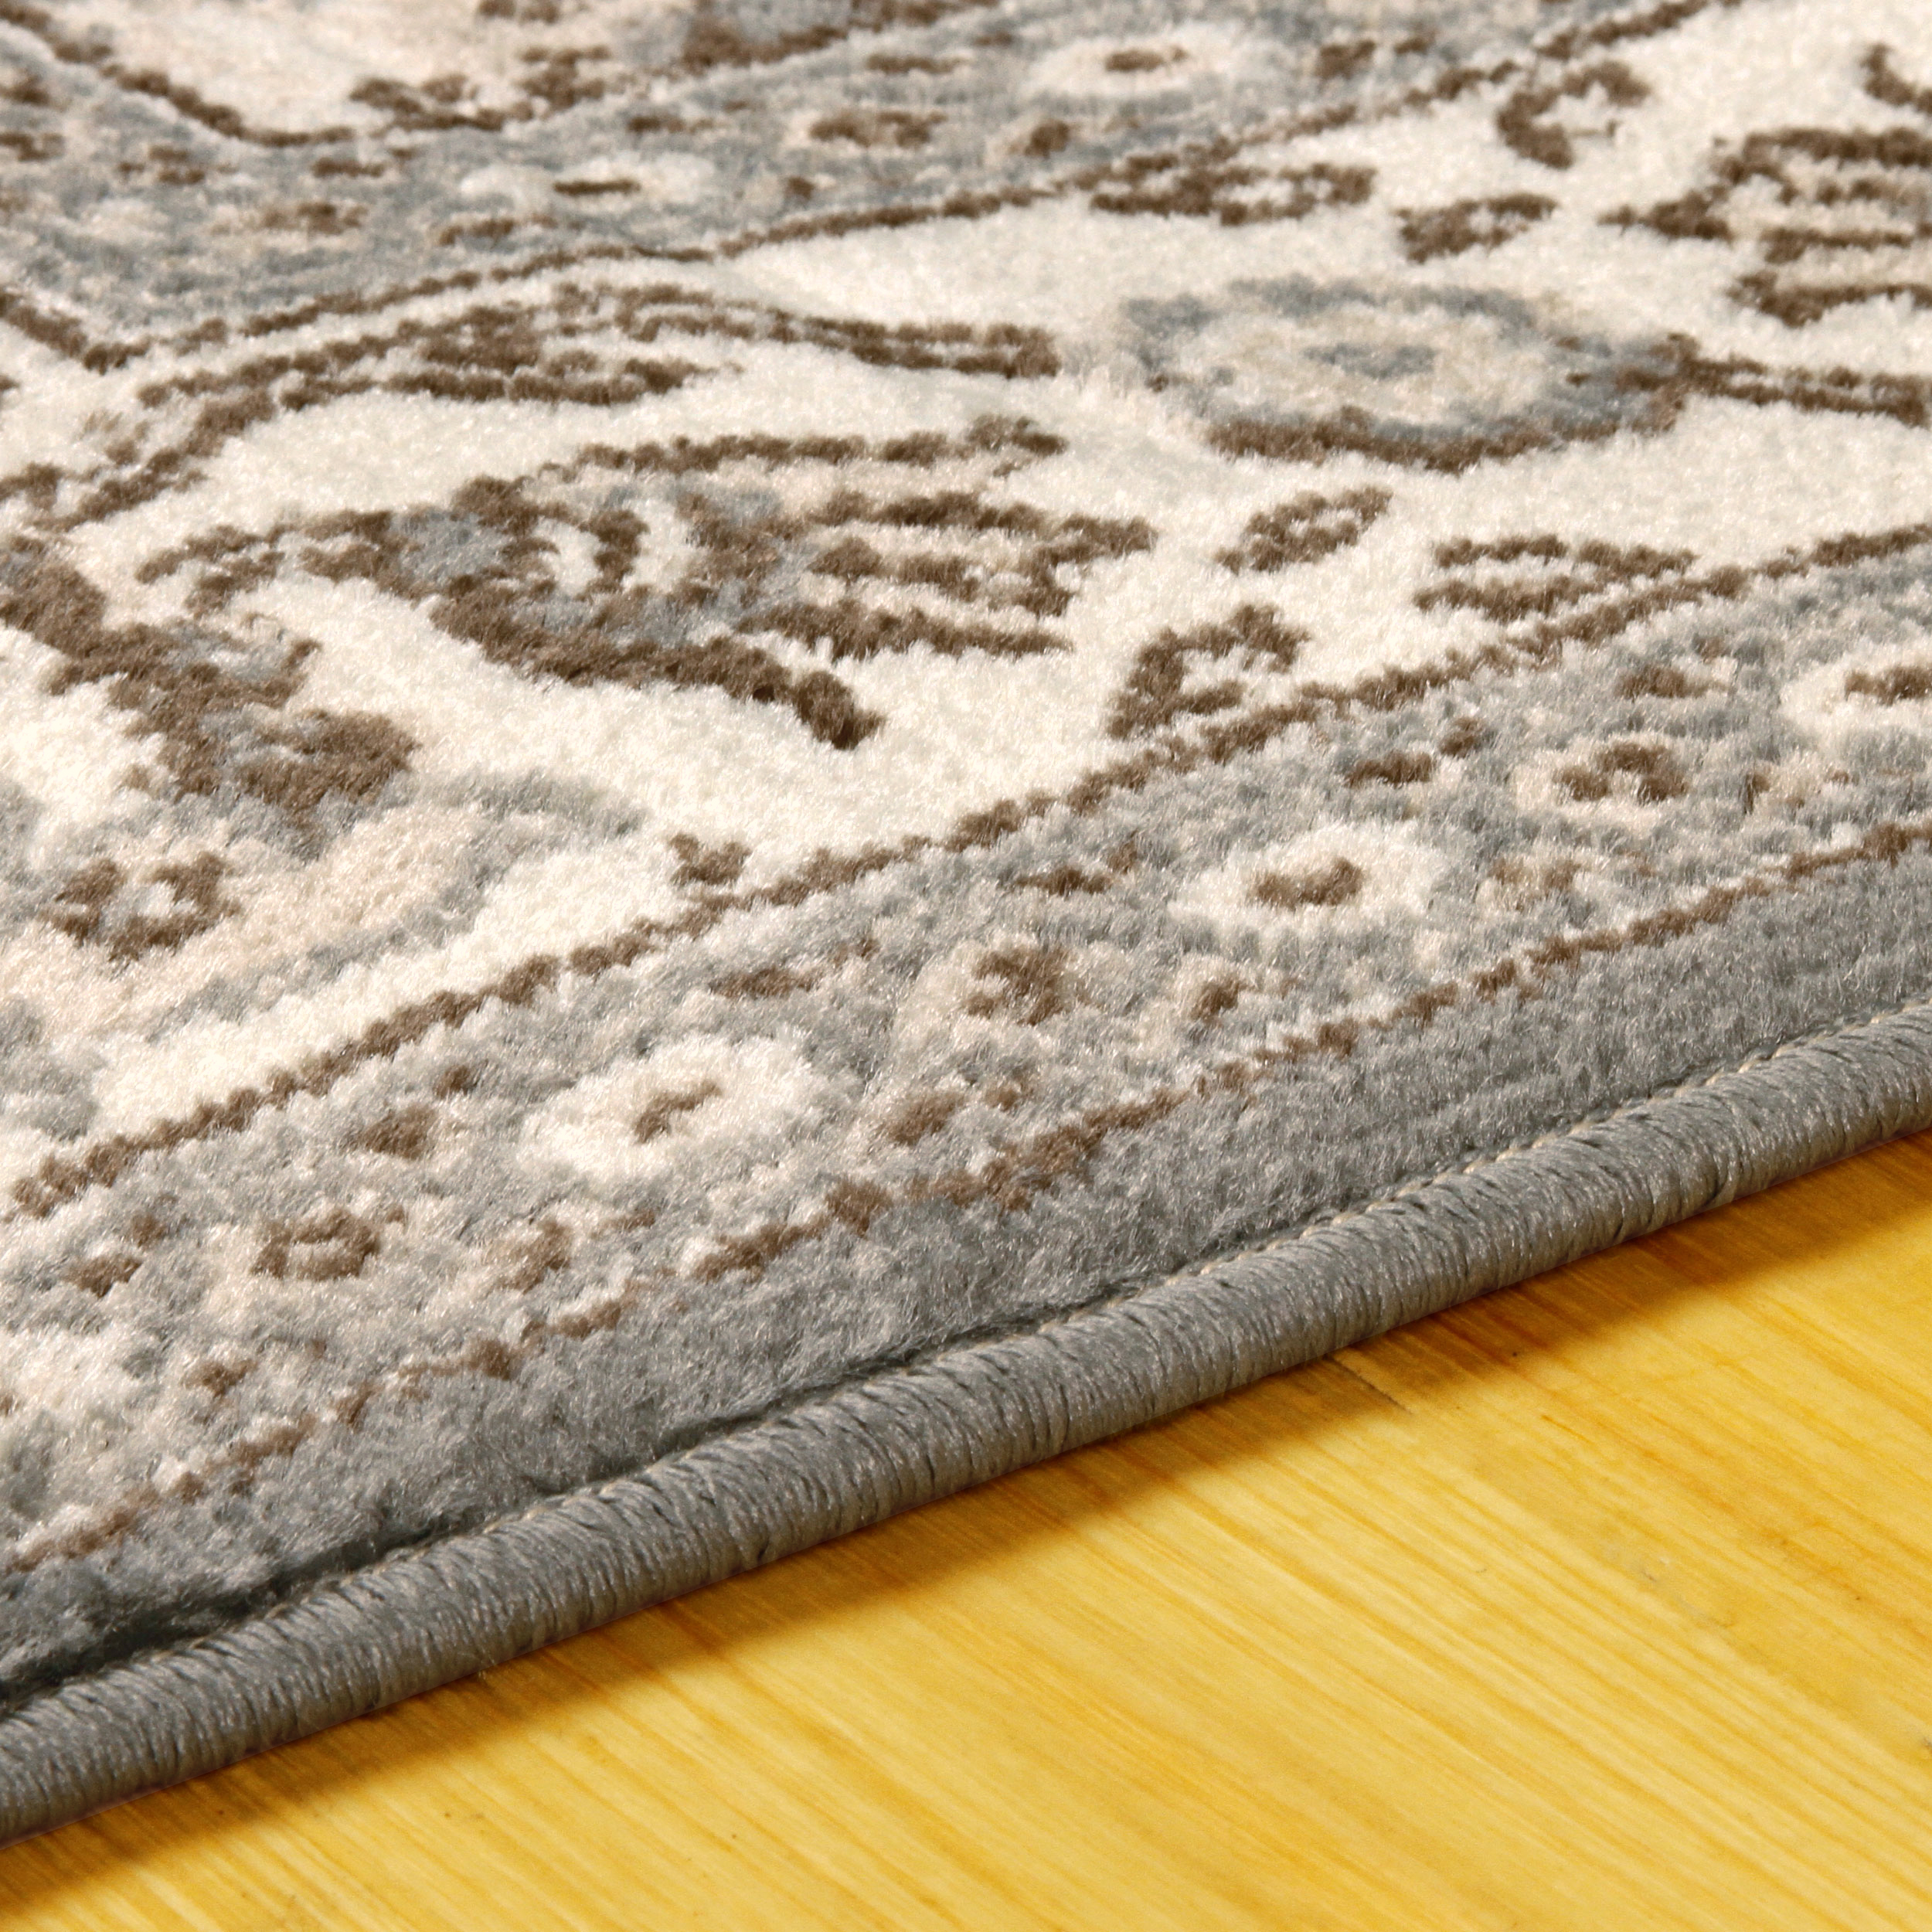 Kingfield Designer Area Rug Collection - image 3 of 3